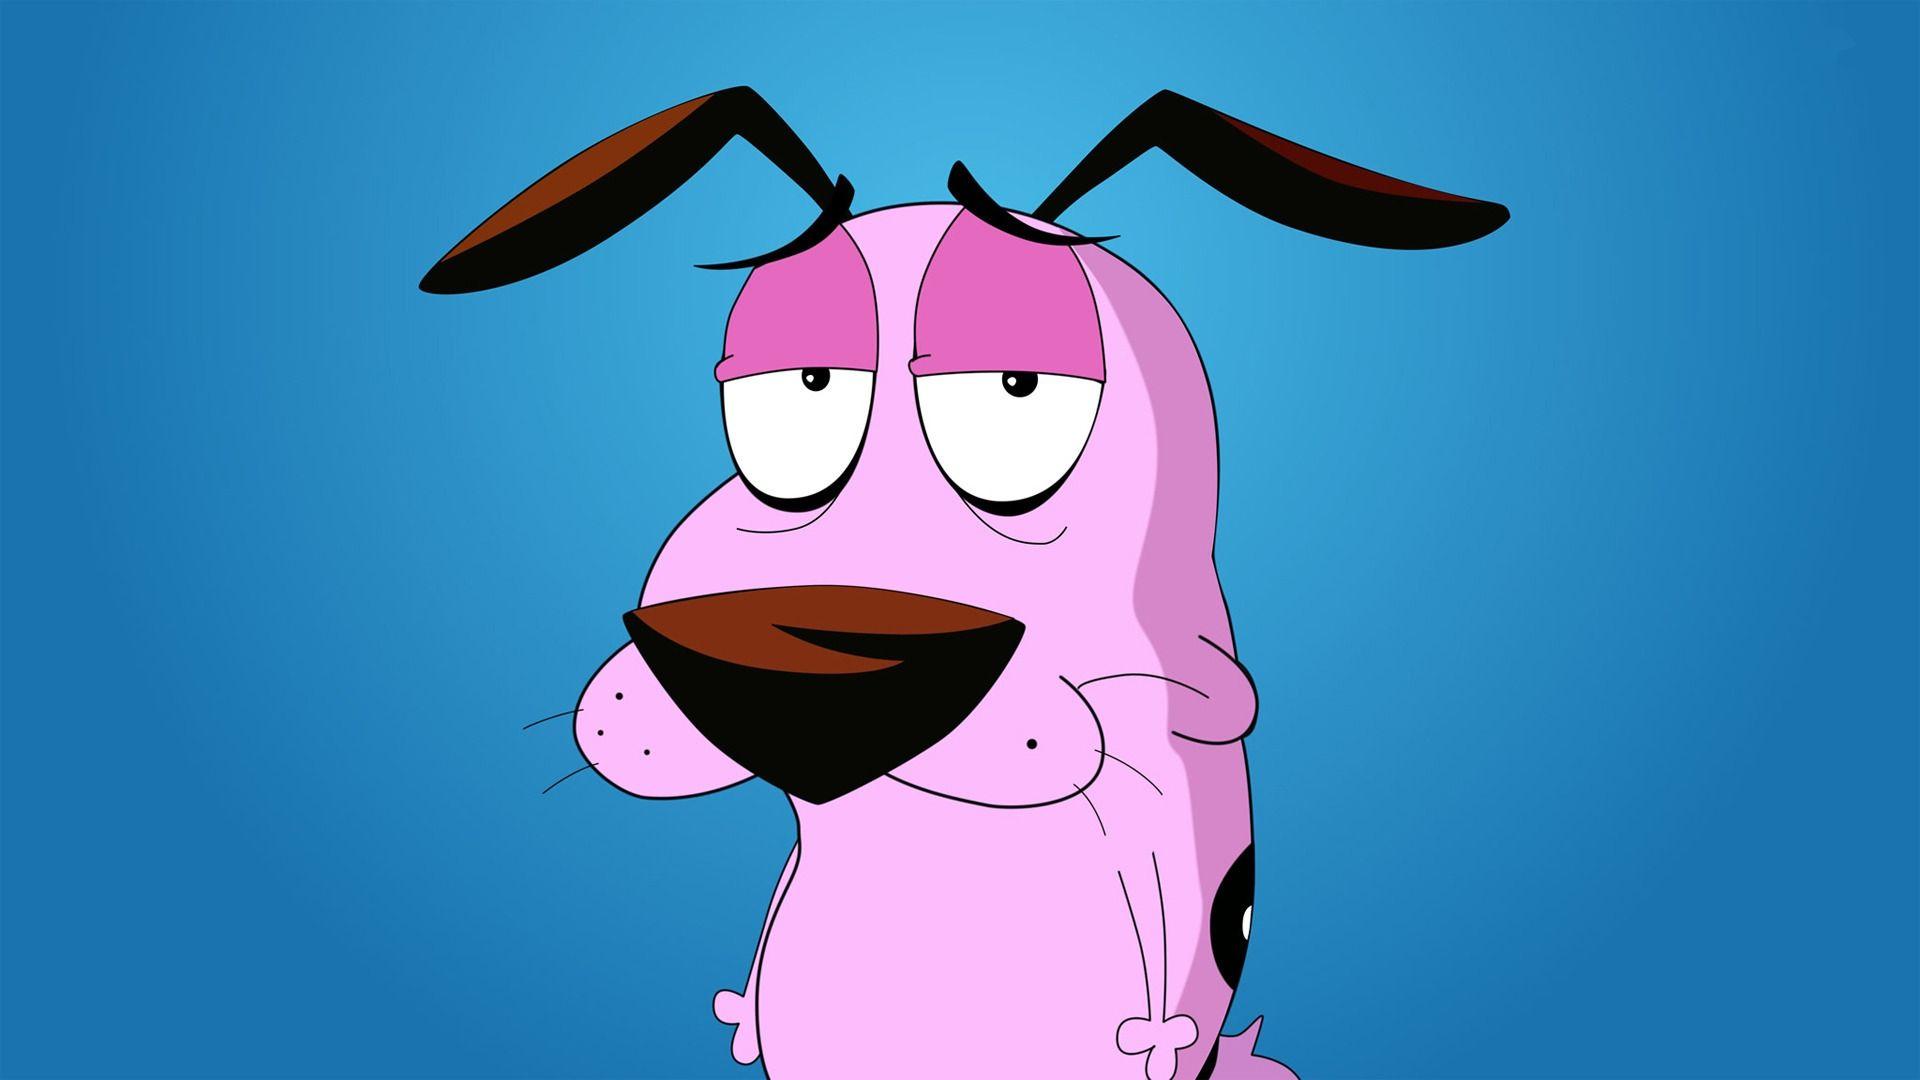 HD Courage The Cowardly Dog Wallpaper. wallpaper.wiki